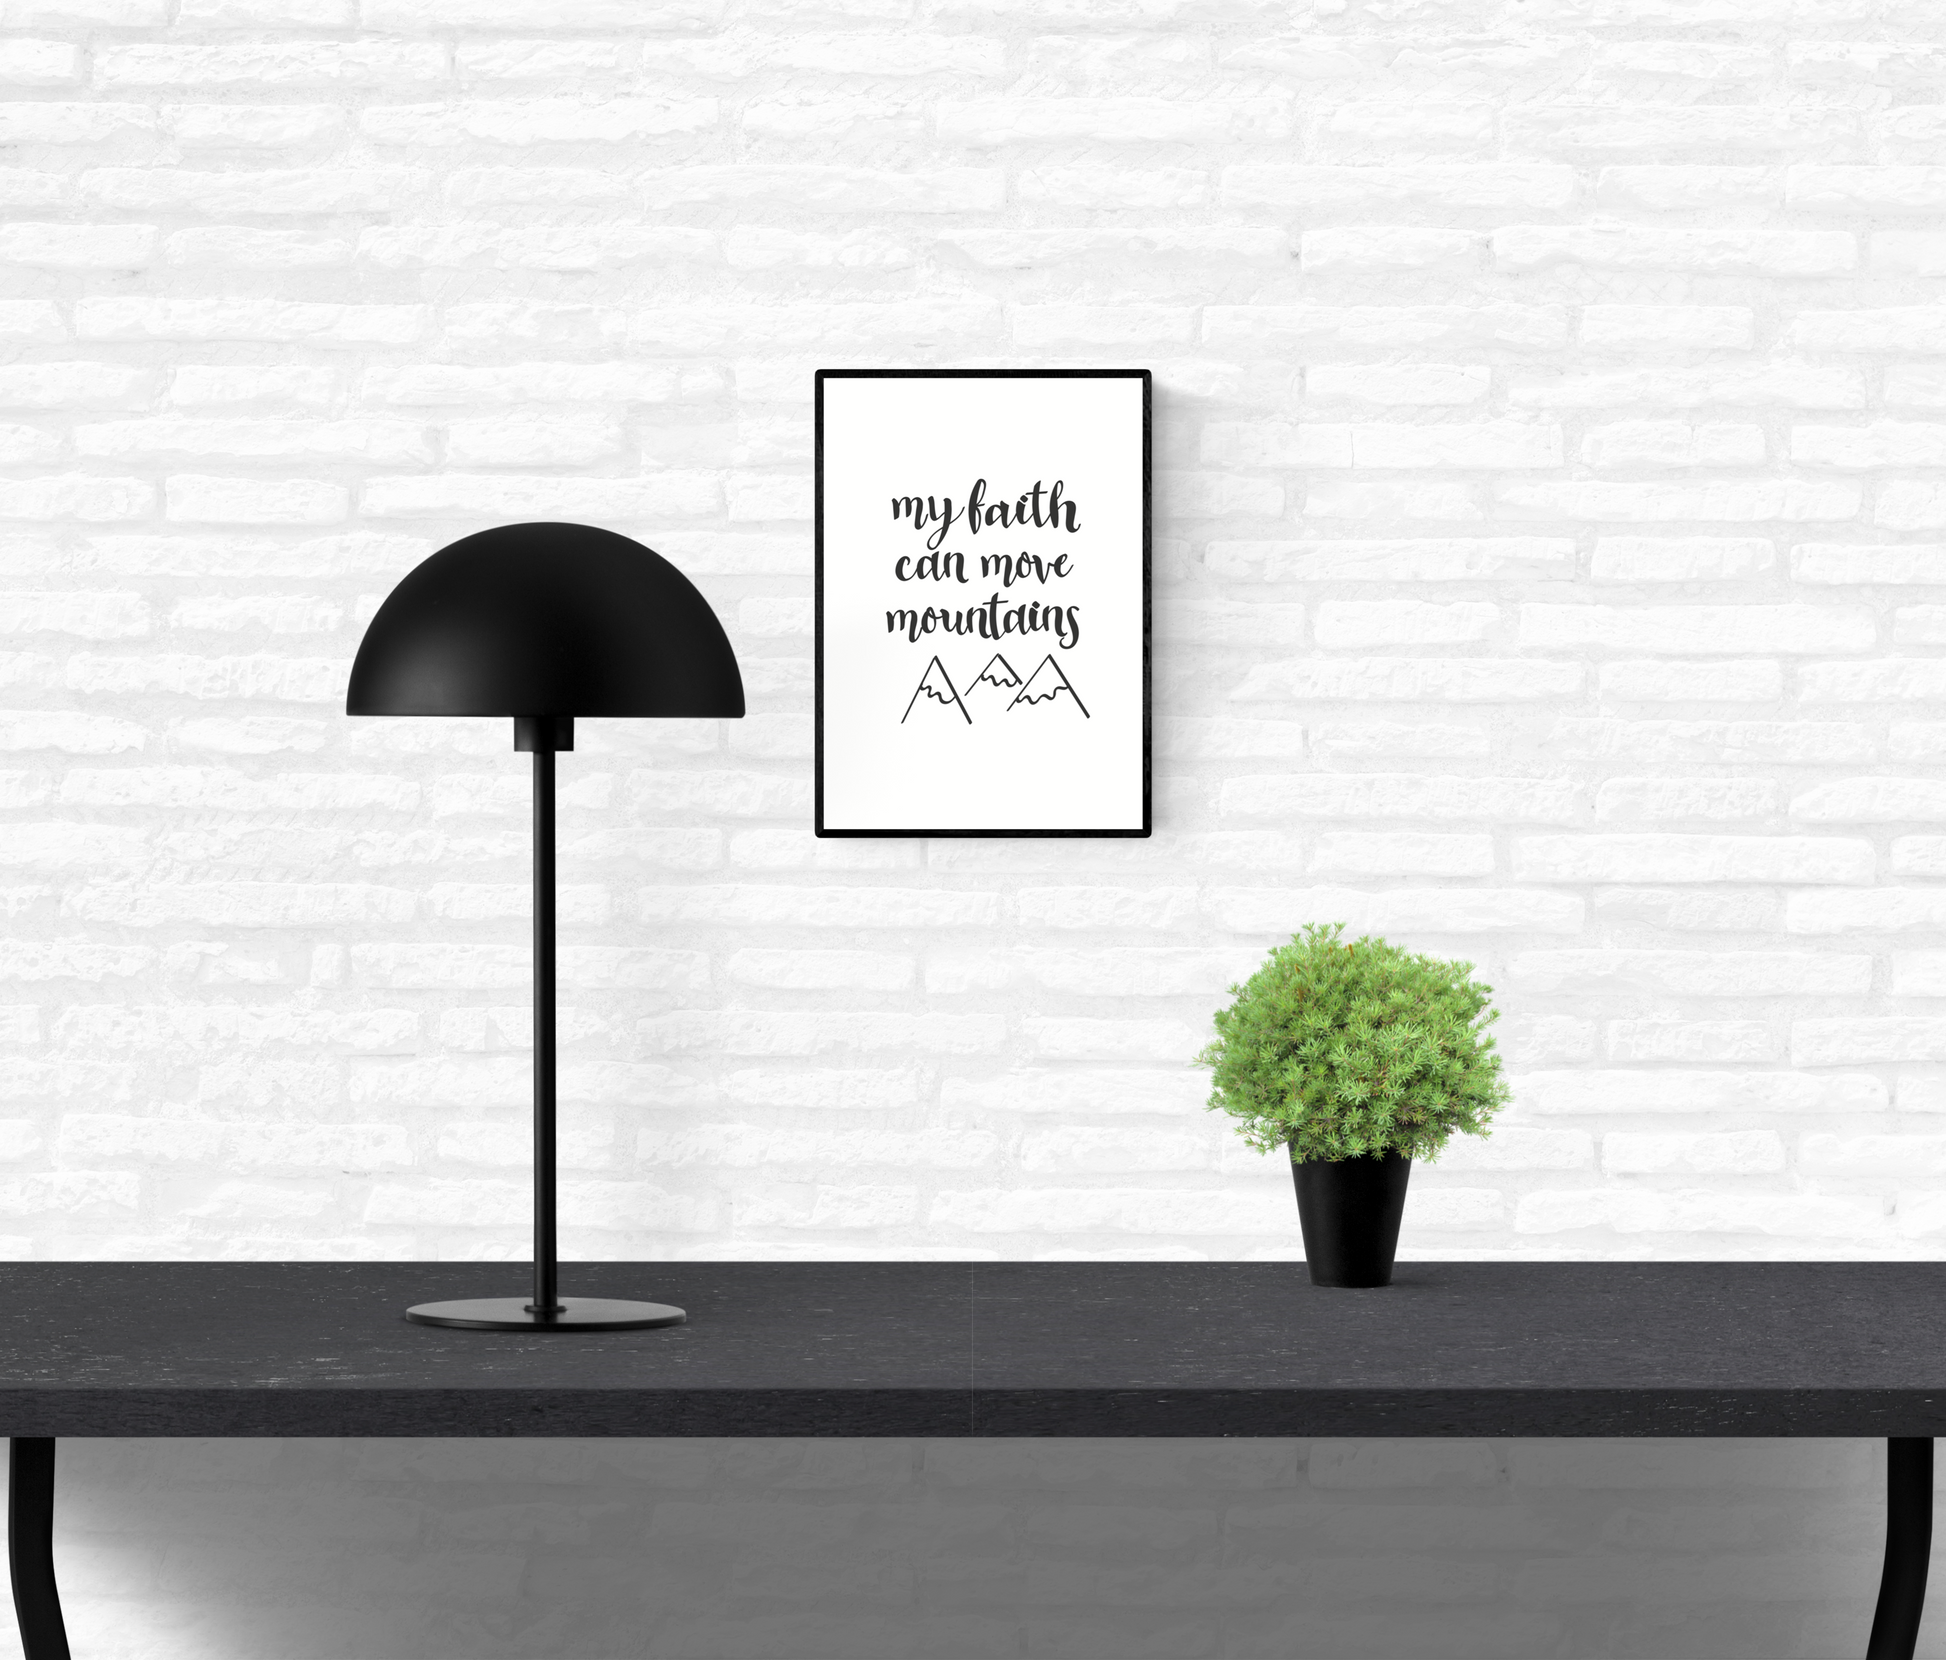 Wall art and quote print with the words, “my faith can move mountains” and line drawings of mountain peaks underneath framed and mounted on an interior white brick wall above a table